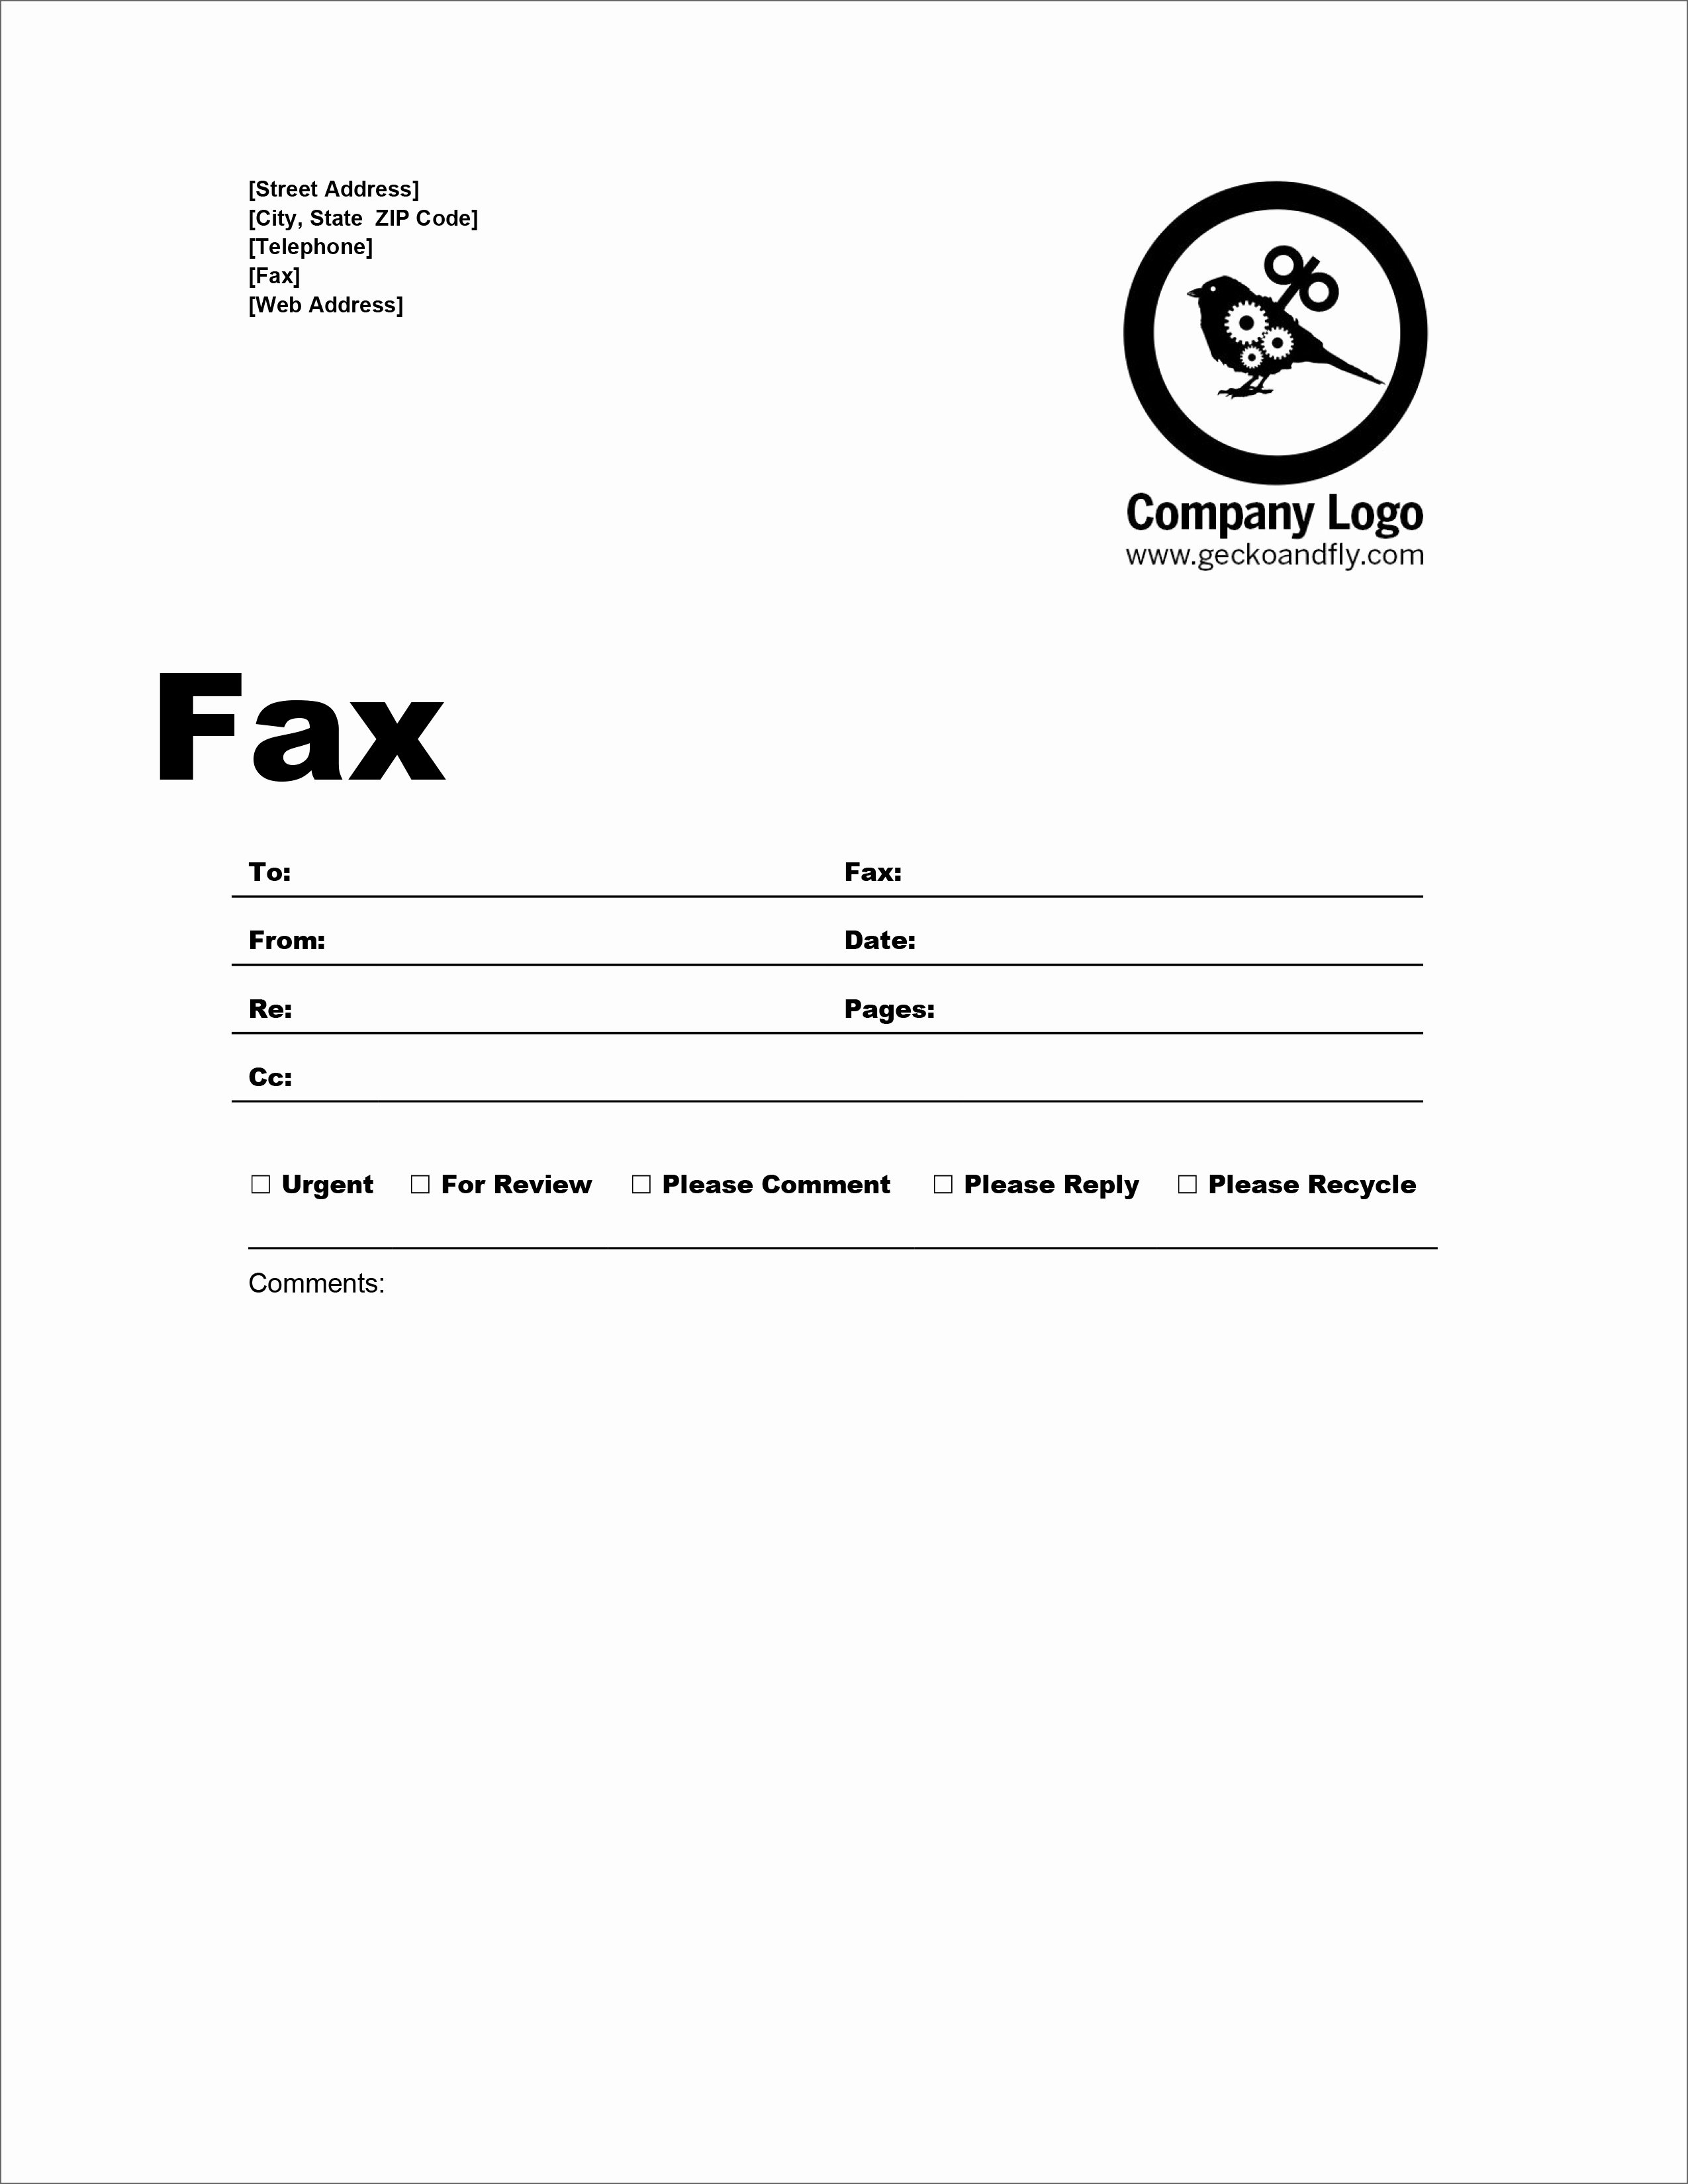 Fax Cover Sheet Template Word Awesome 20 Free Fax Cover Templates Sheets In Microsoft Fice Docx